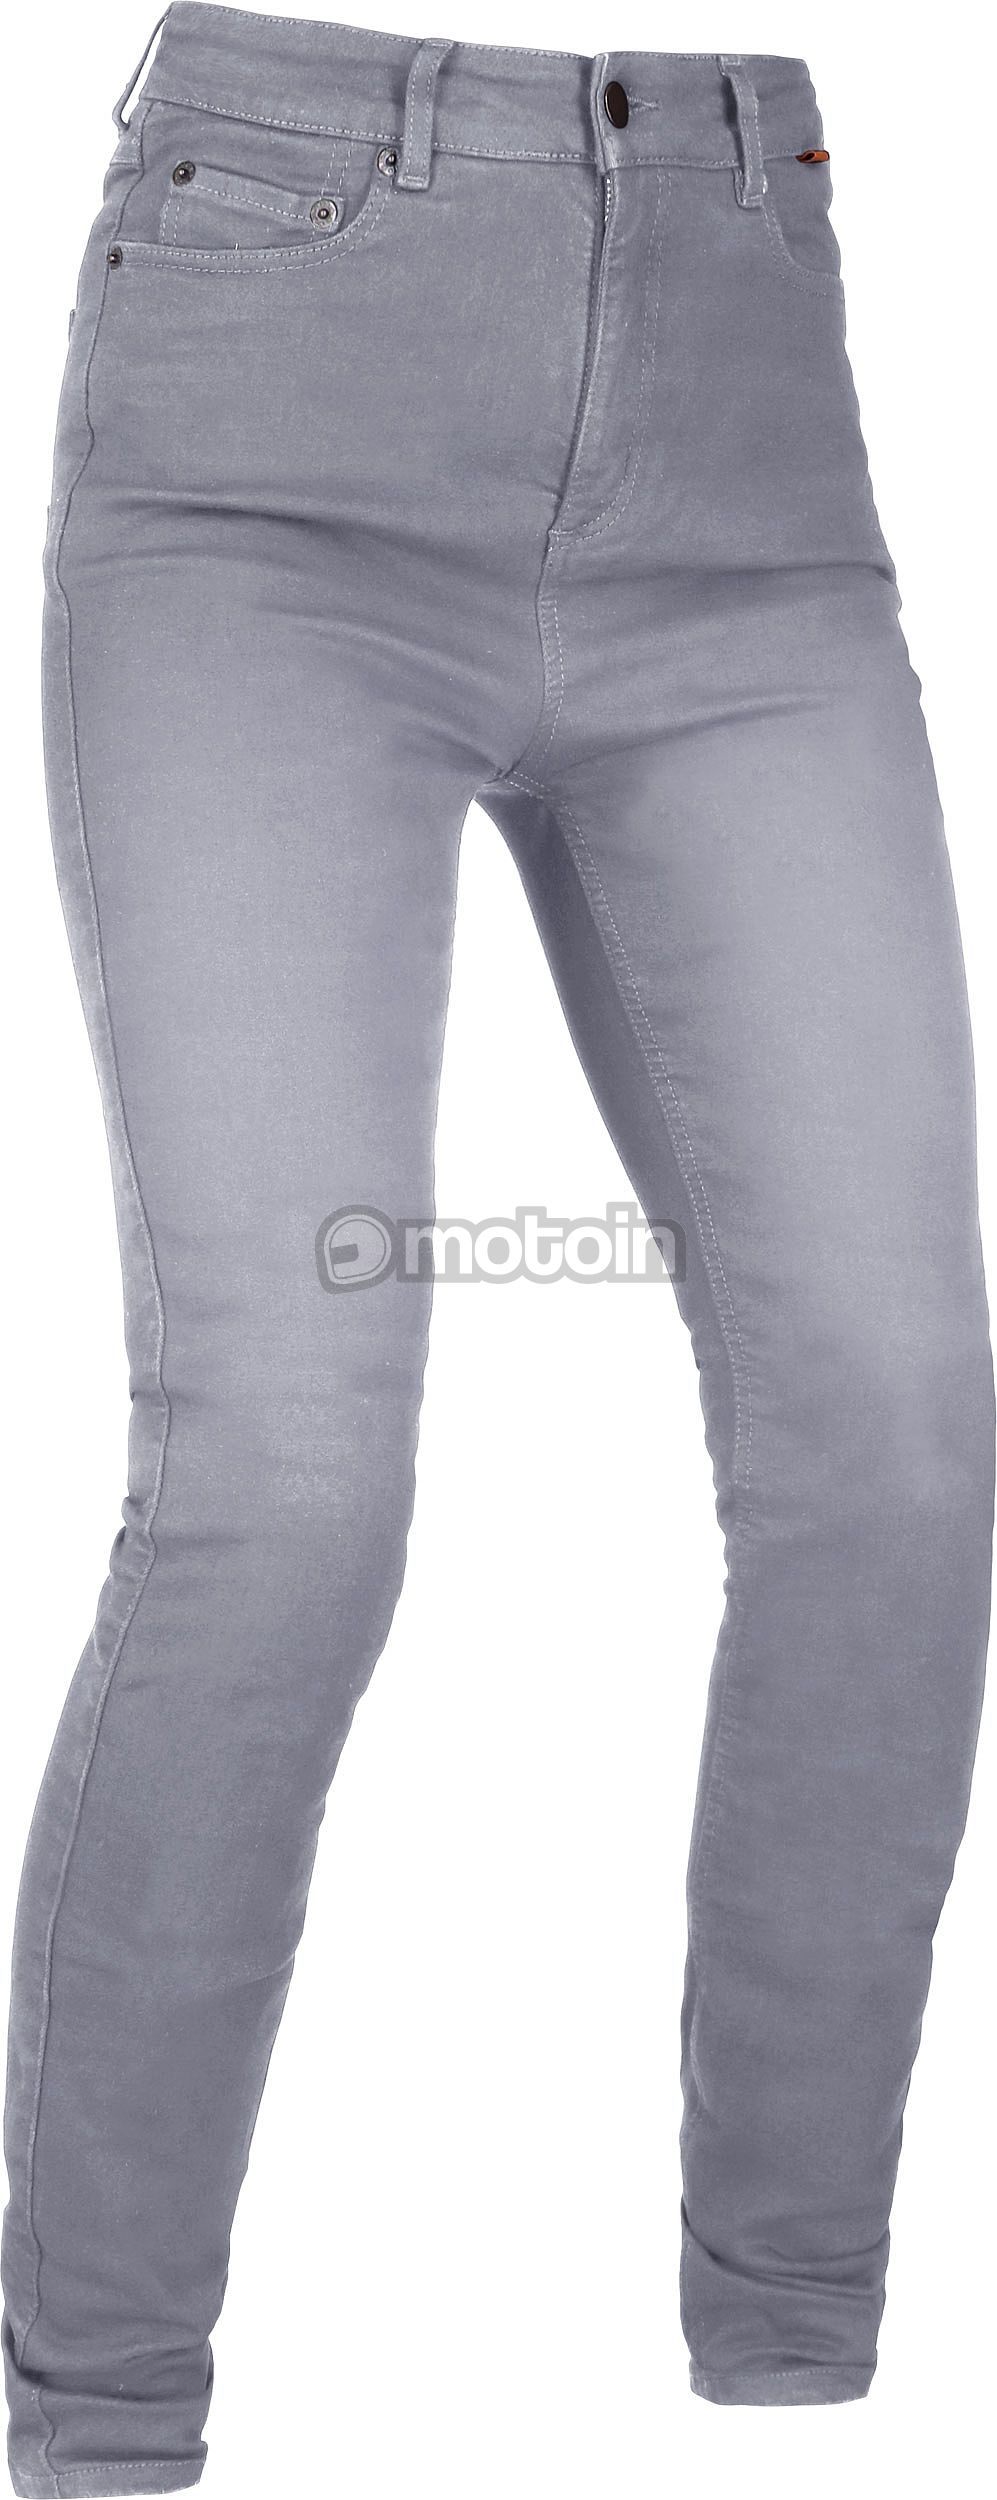 Richa Second Skin, jeans donna